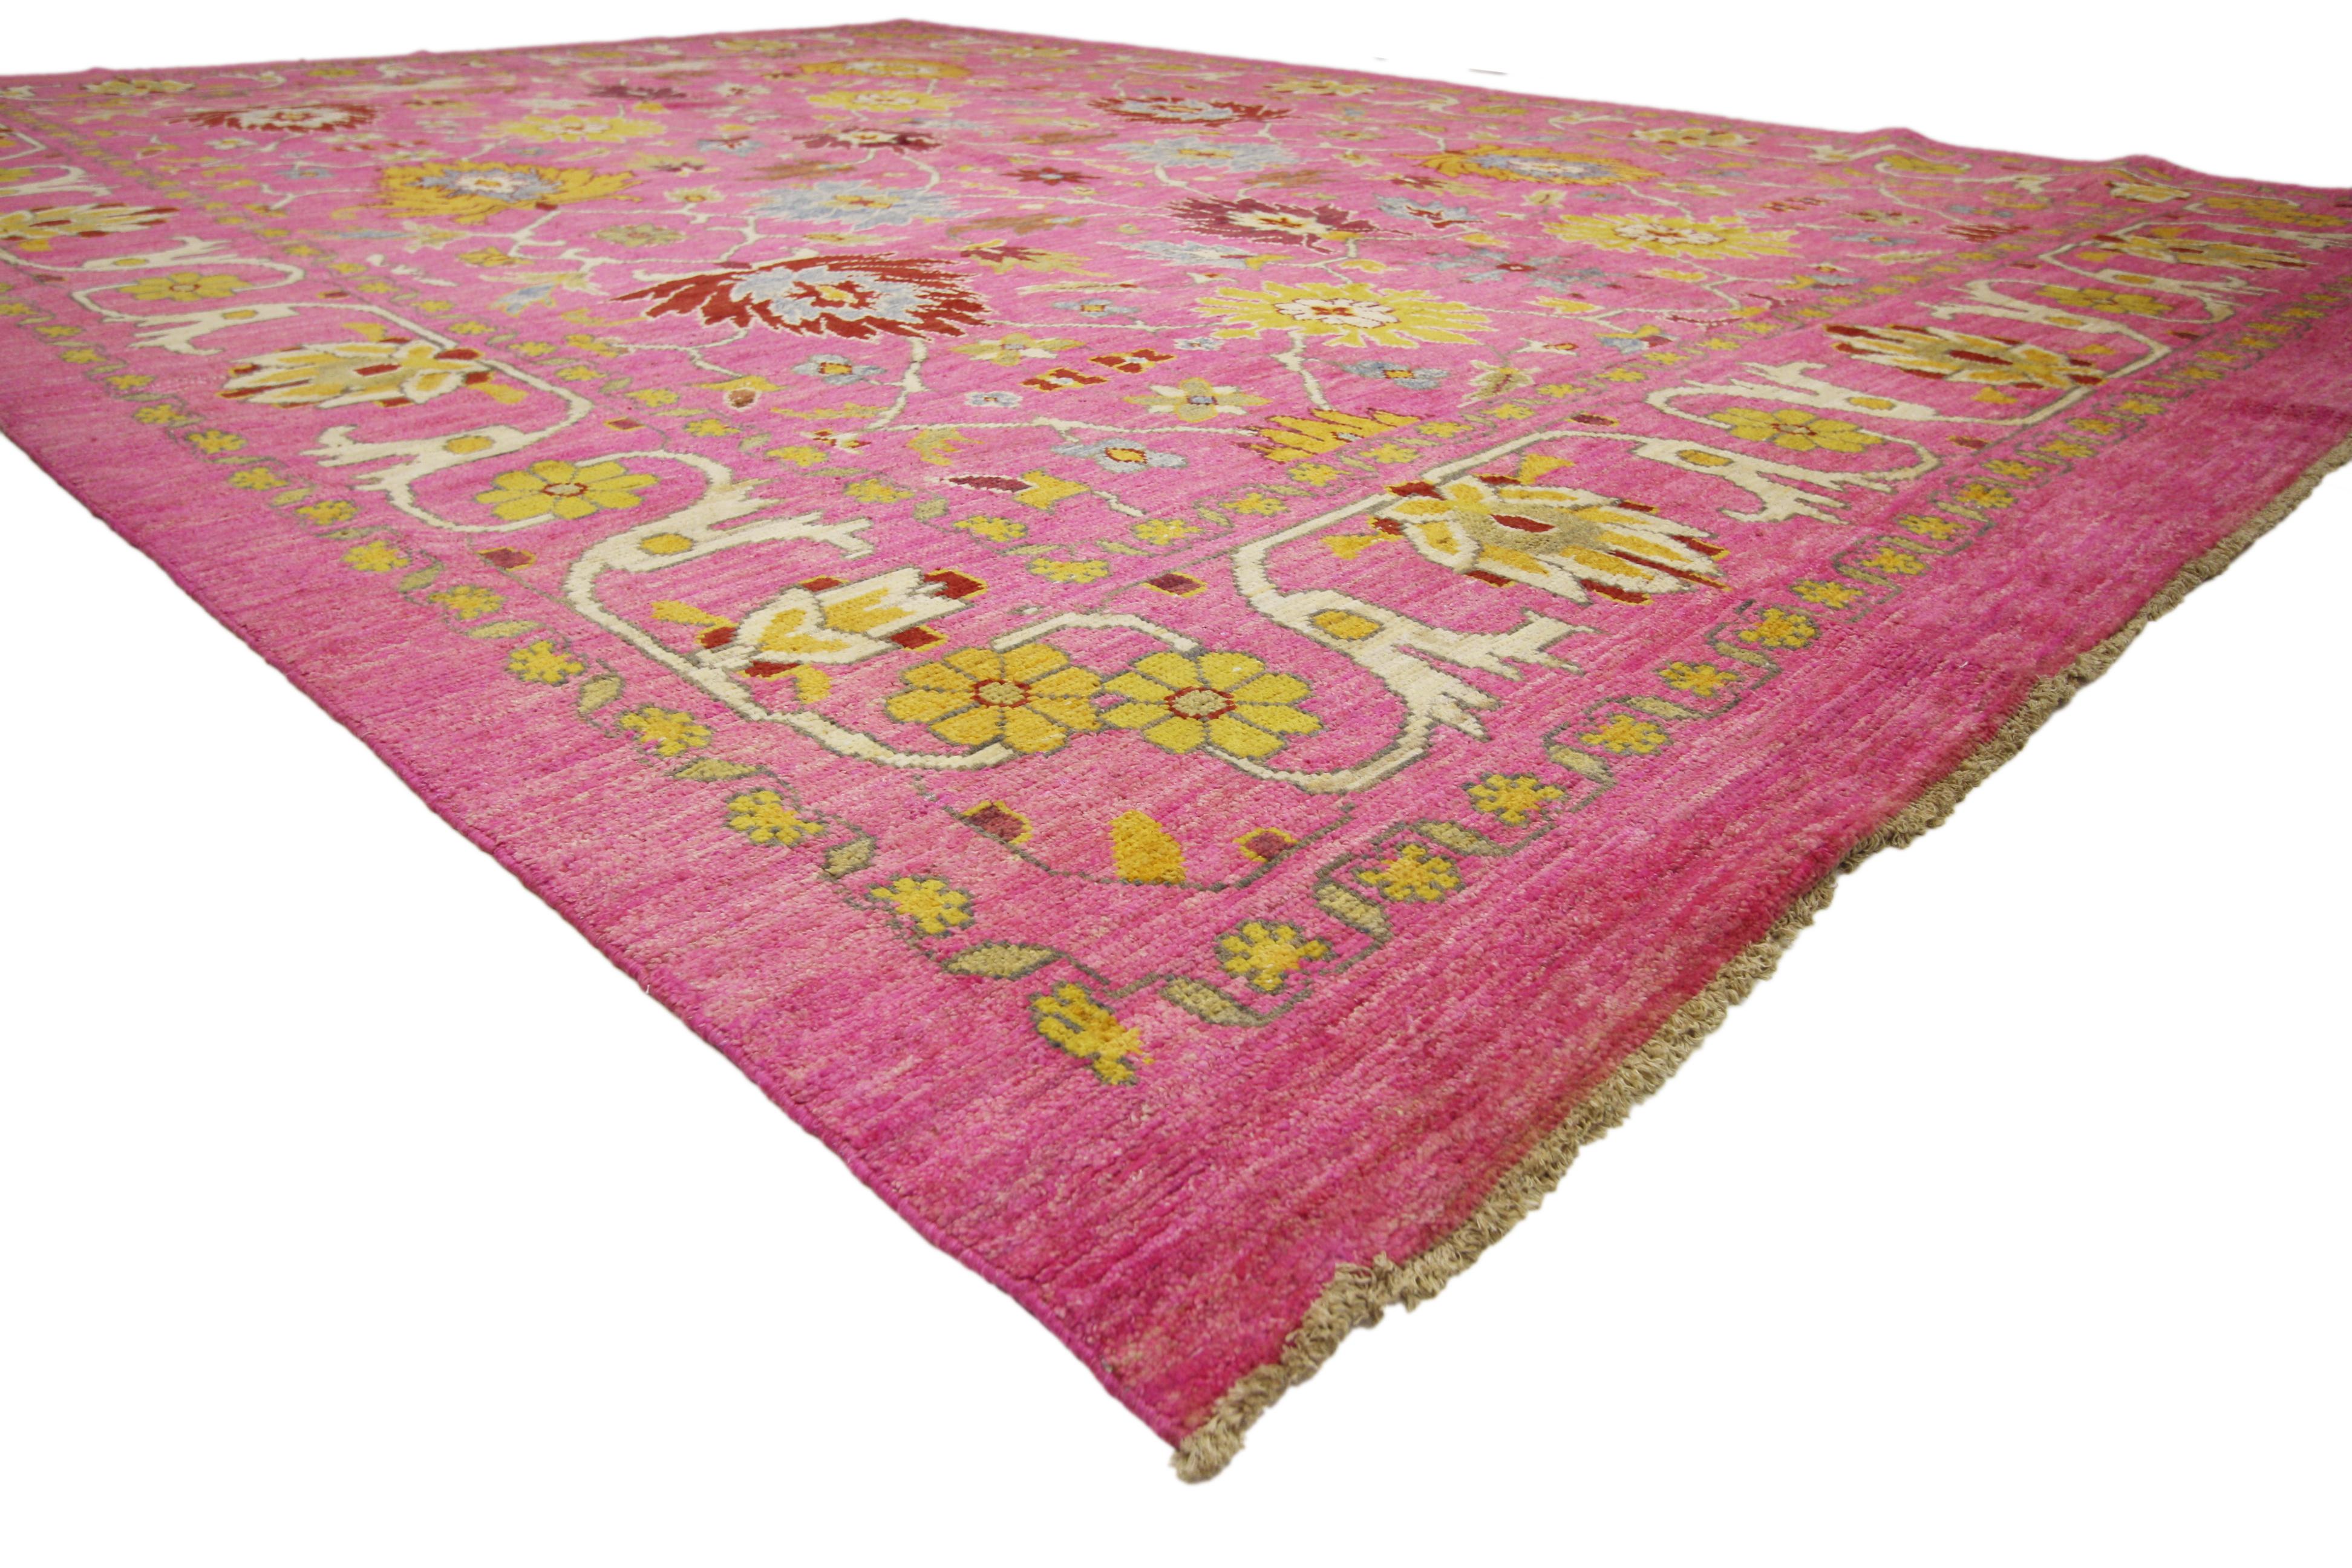 60660 New Contemporary Pink Turkish Oushak Rug with Post-Modern Style. This hand knotted wool contemporary Oushak area rug features an all-over lively floral lattice pattern composed of Harshang-style motifs, blooming palmettes, stylized flowers,